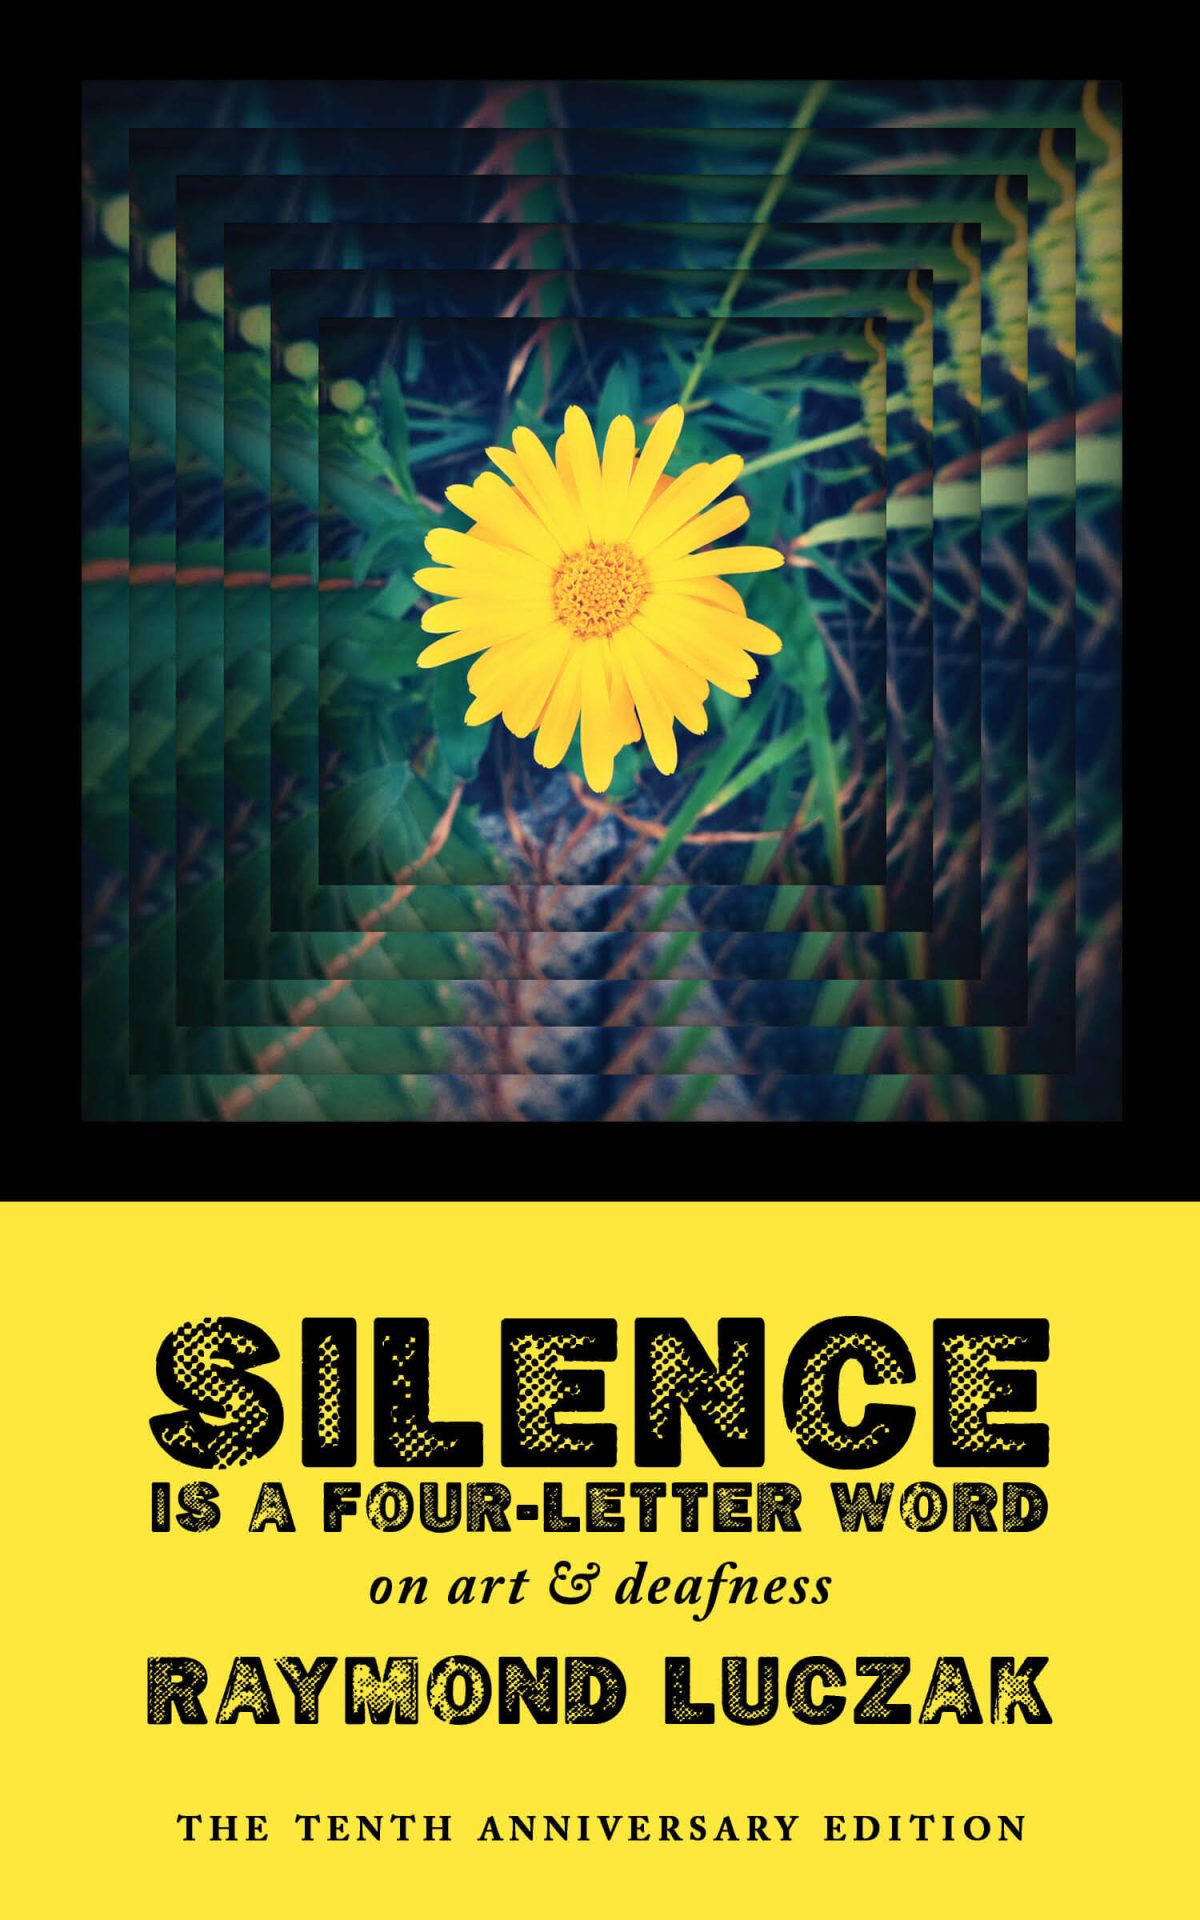 A bright yellow flower against dark green leaves is repeated over and over again in ever smaller sizes so the frame becomes striped. Below is the text in black against a solid yellow background: SILENCE IS A FOUR-LETTER WORD | on art & deafness | RAYMOND LUCZAK | The Tenth Anniversary Edition.